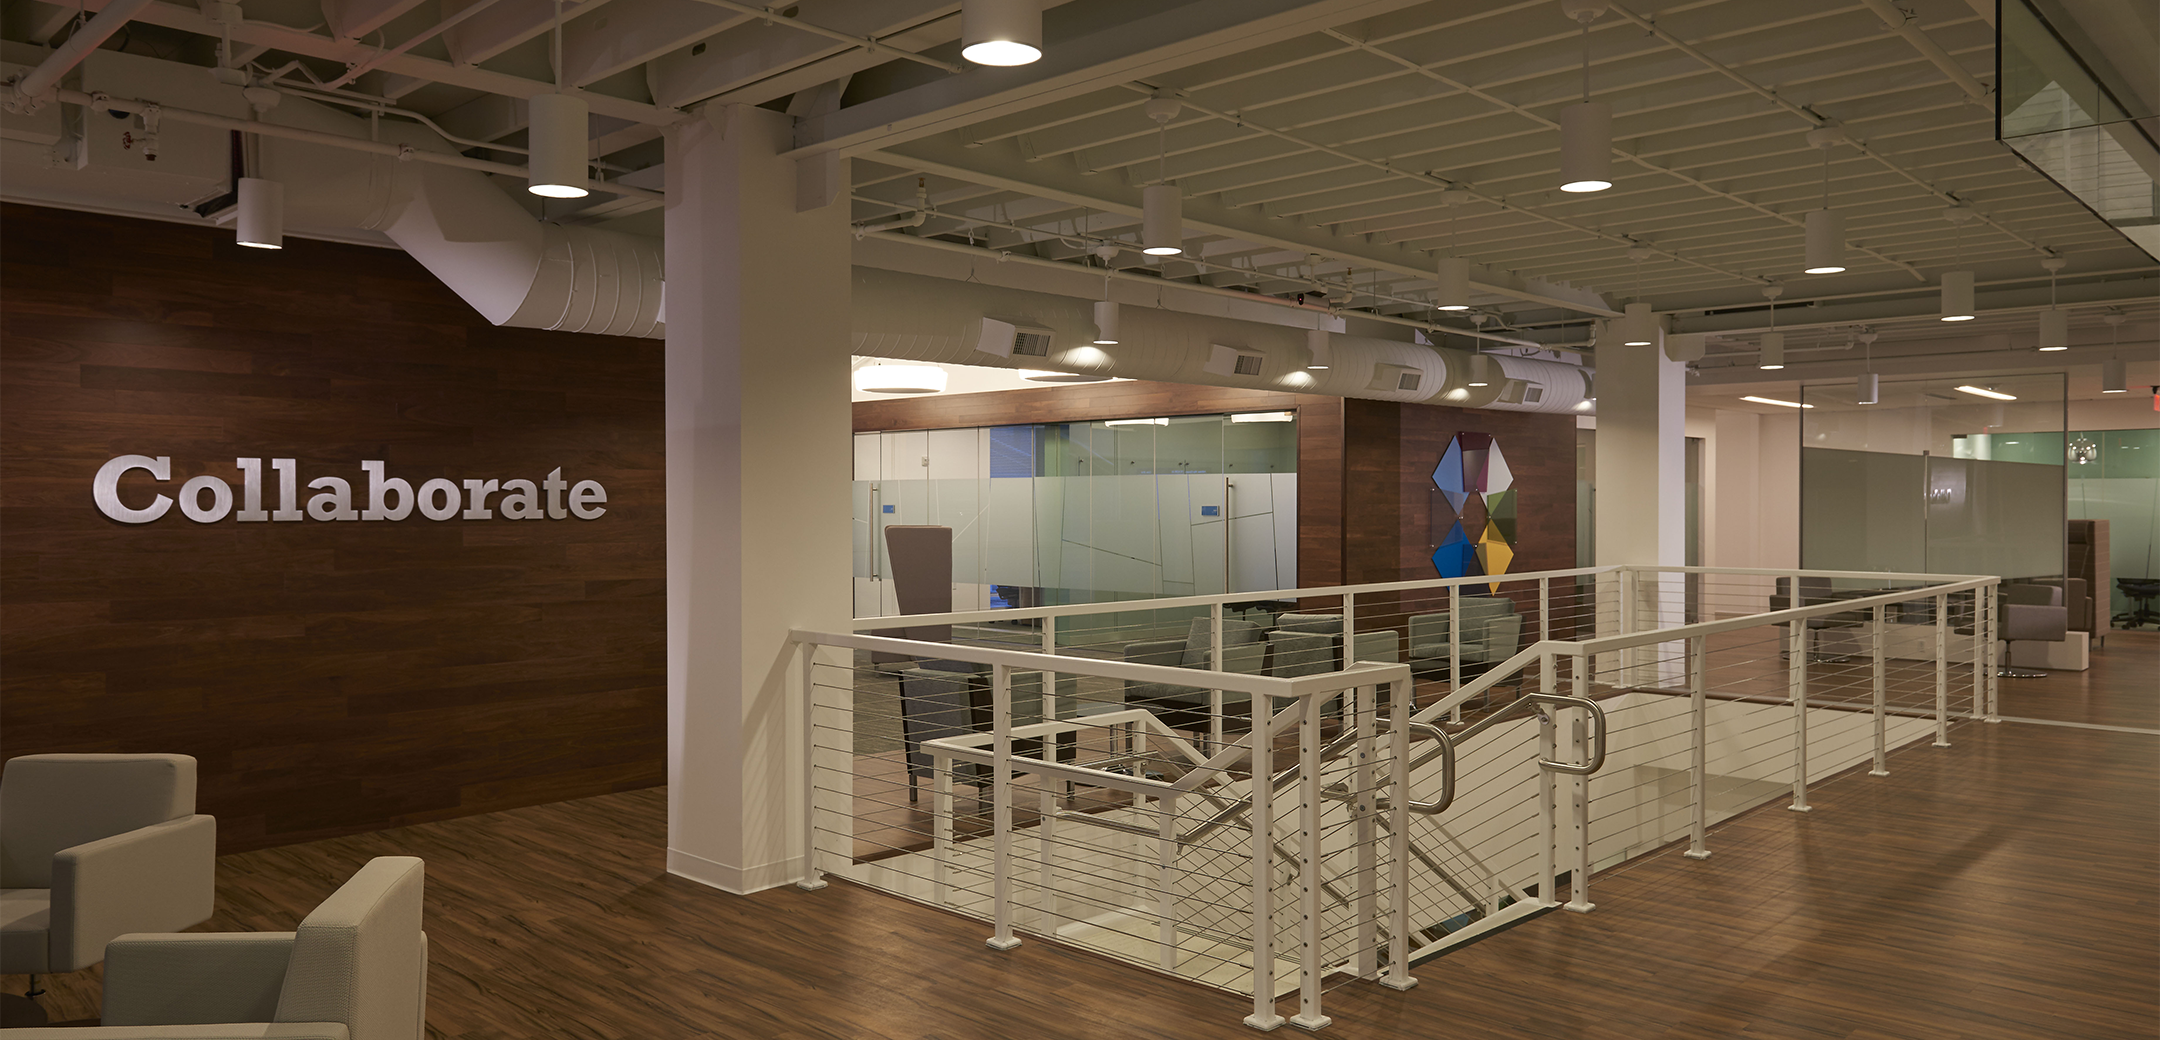 The interior space of Amerisource Bergen featuring a downward staircase in an open lobby space with a Collaborate sign on the wall.